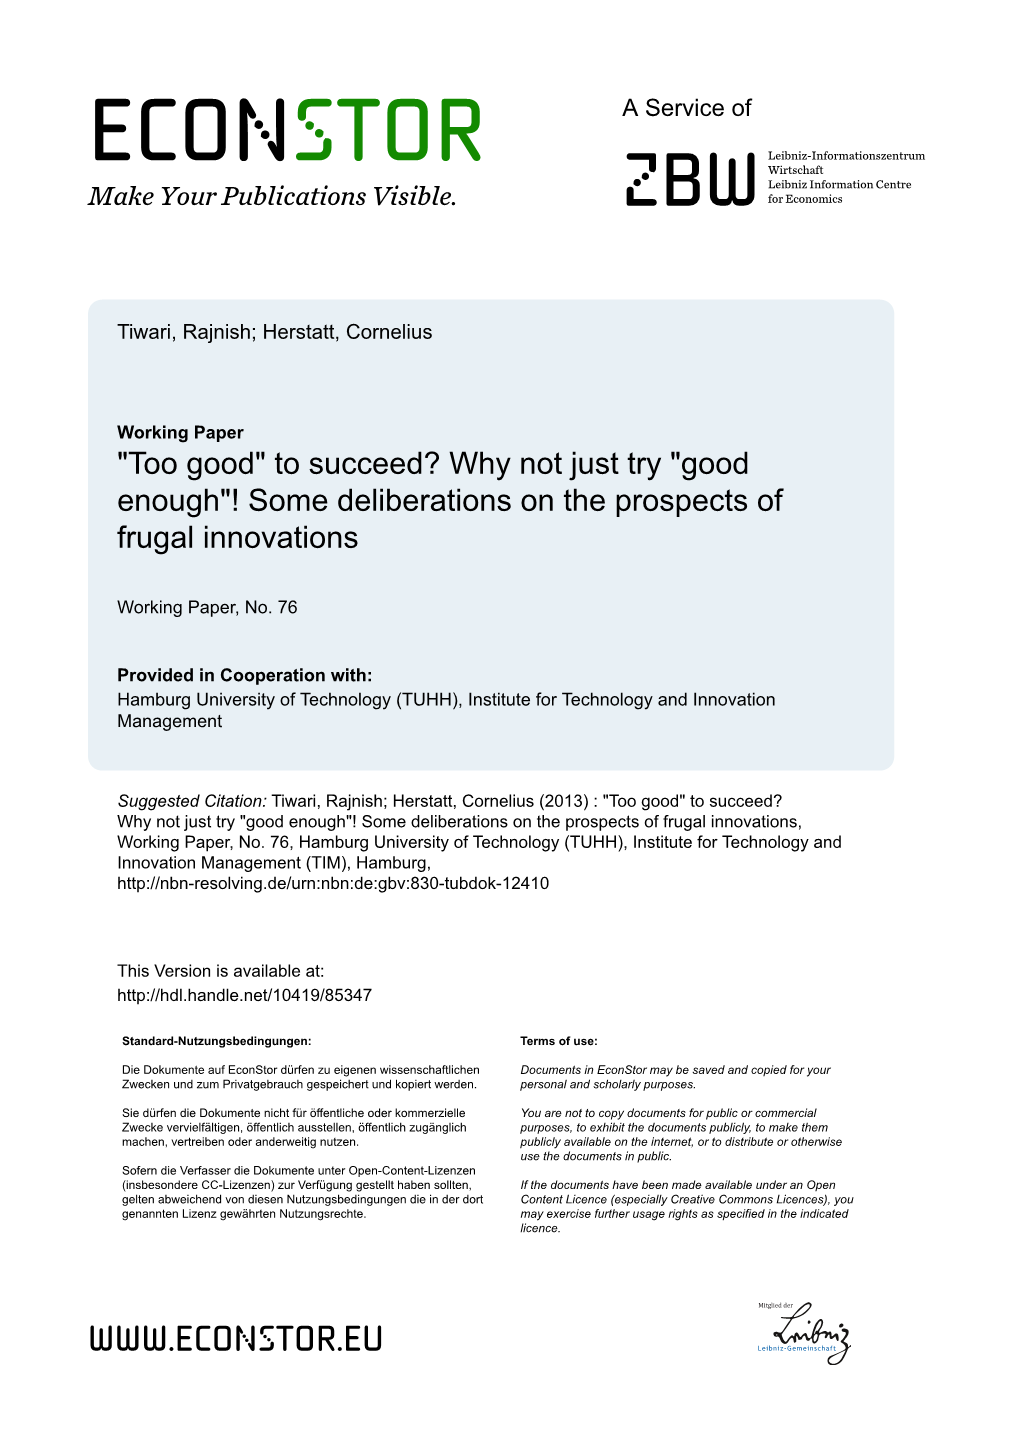 To Succeed? Why Not Just Try "Good Enough"! Some Deliberations on the Prospects of Frugal Innovations